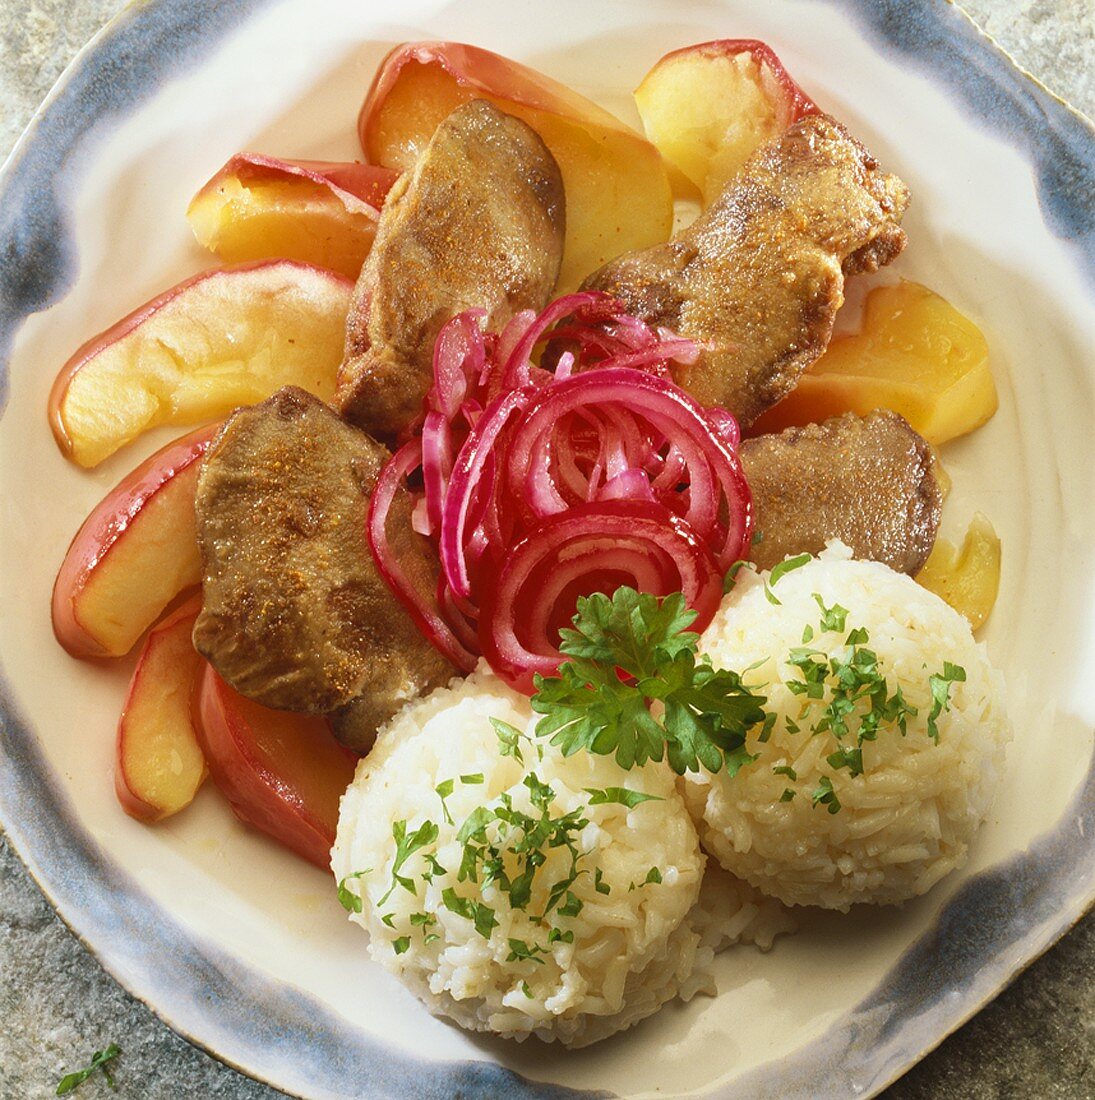 Chicken livers with apples, onions and rice